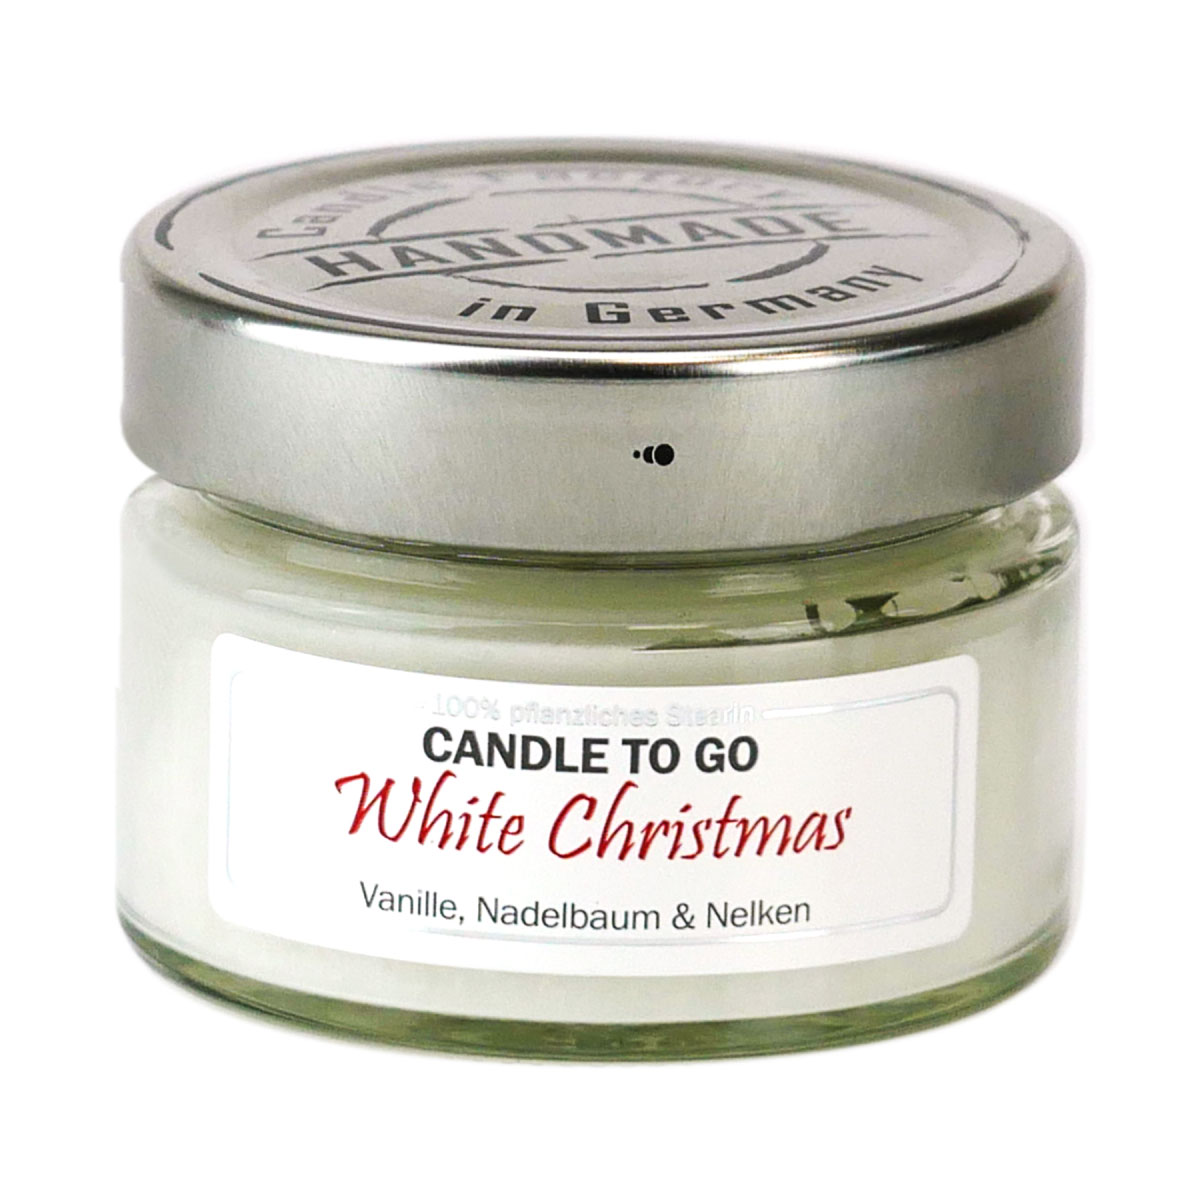 White Christmas - Candle to Go Duftkerze von Candle Factory